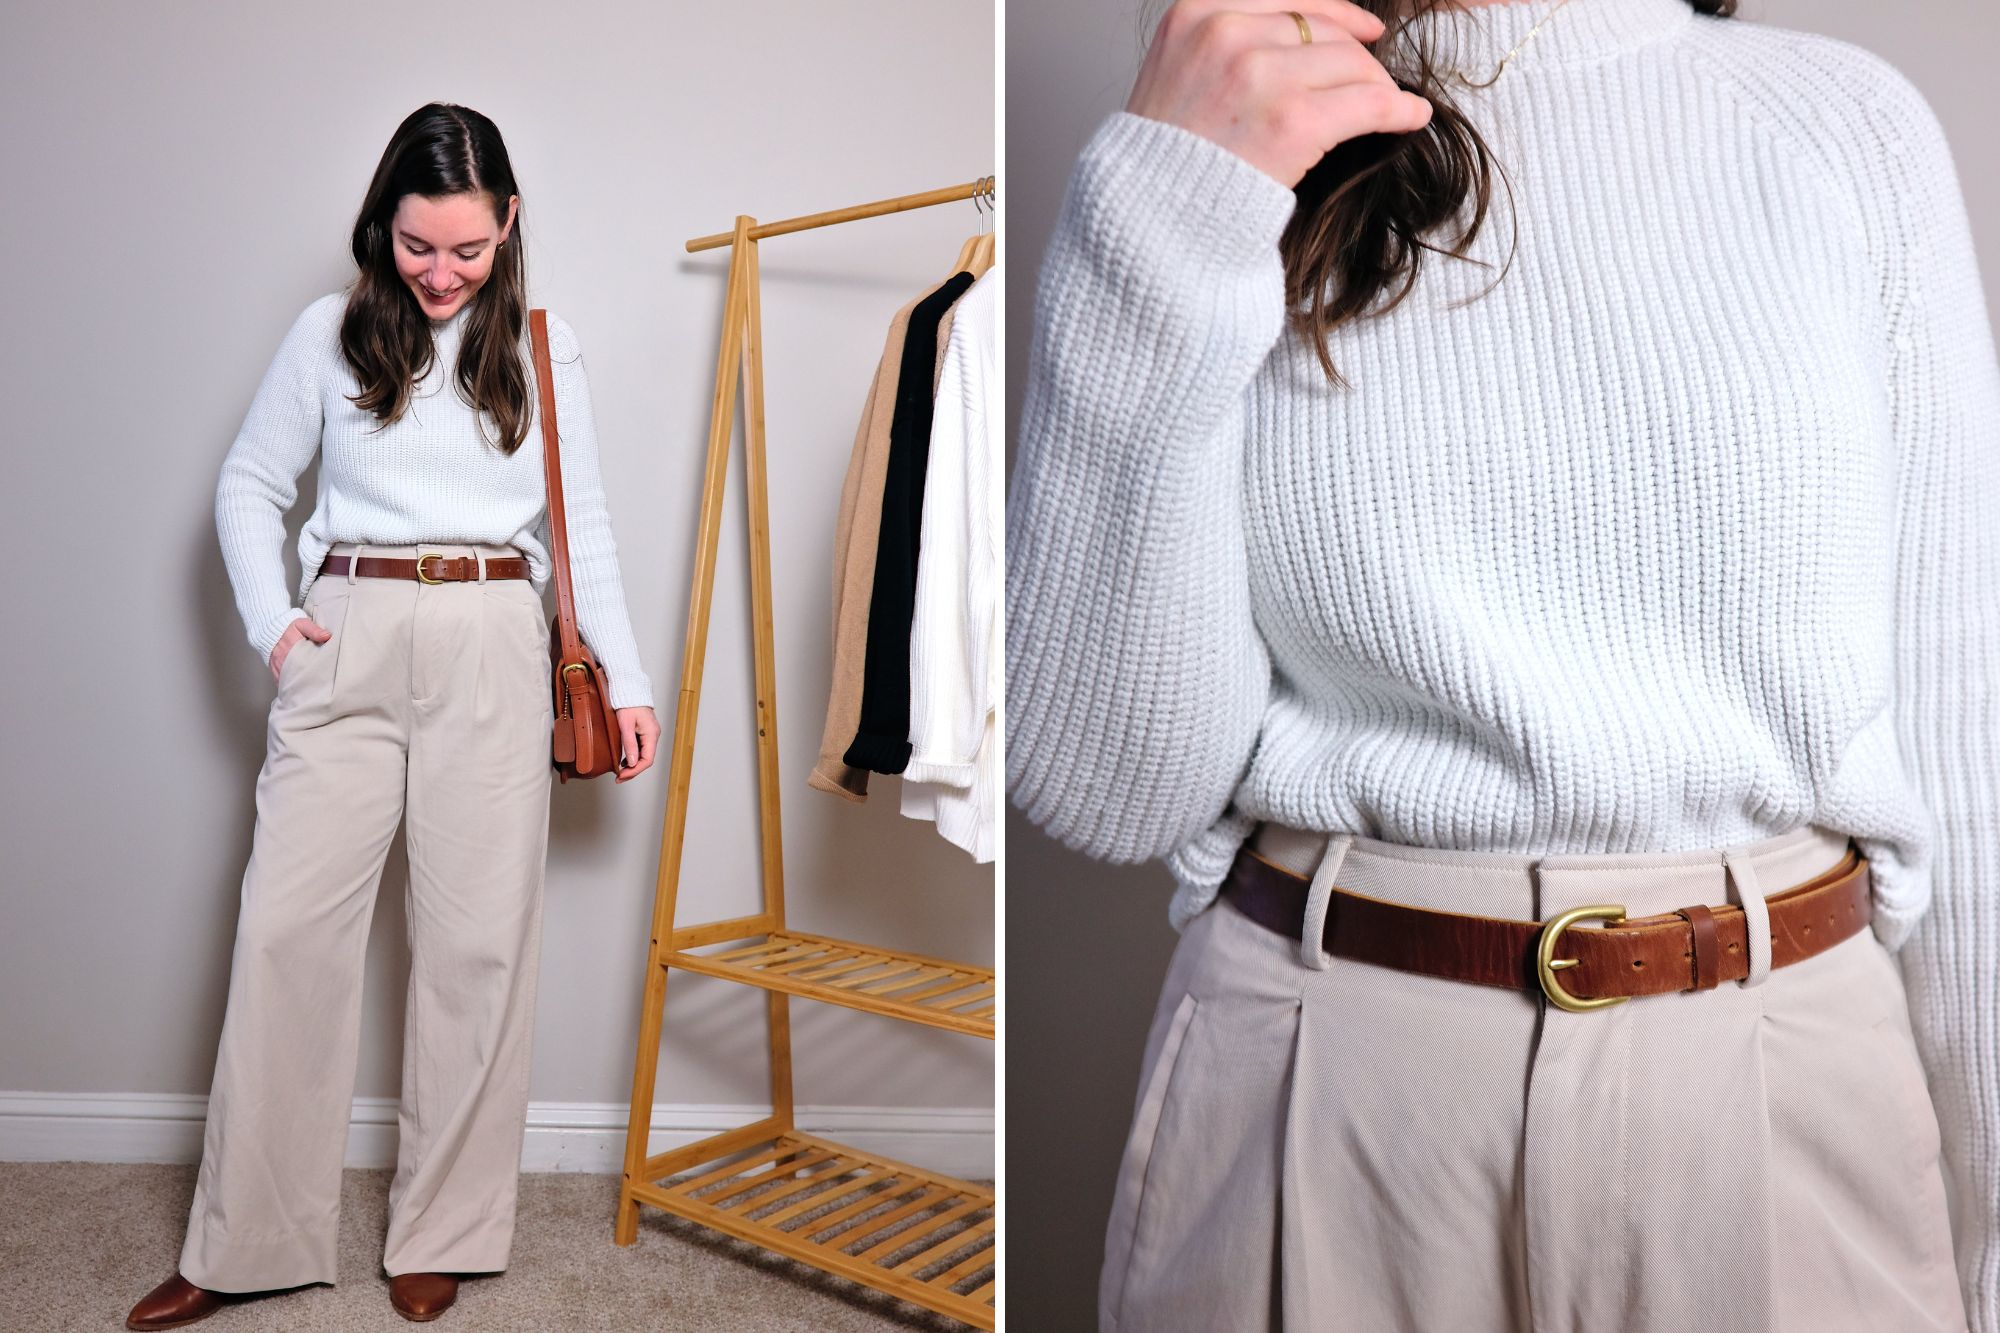 Alyssa wears the Fisherman Sweater from Quince in two images; one shows a close-up of the fabric